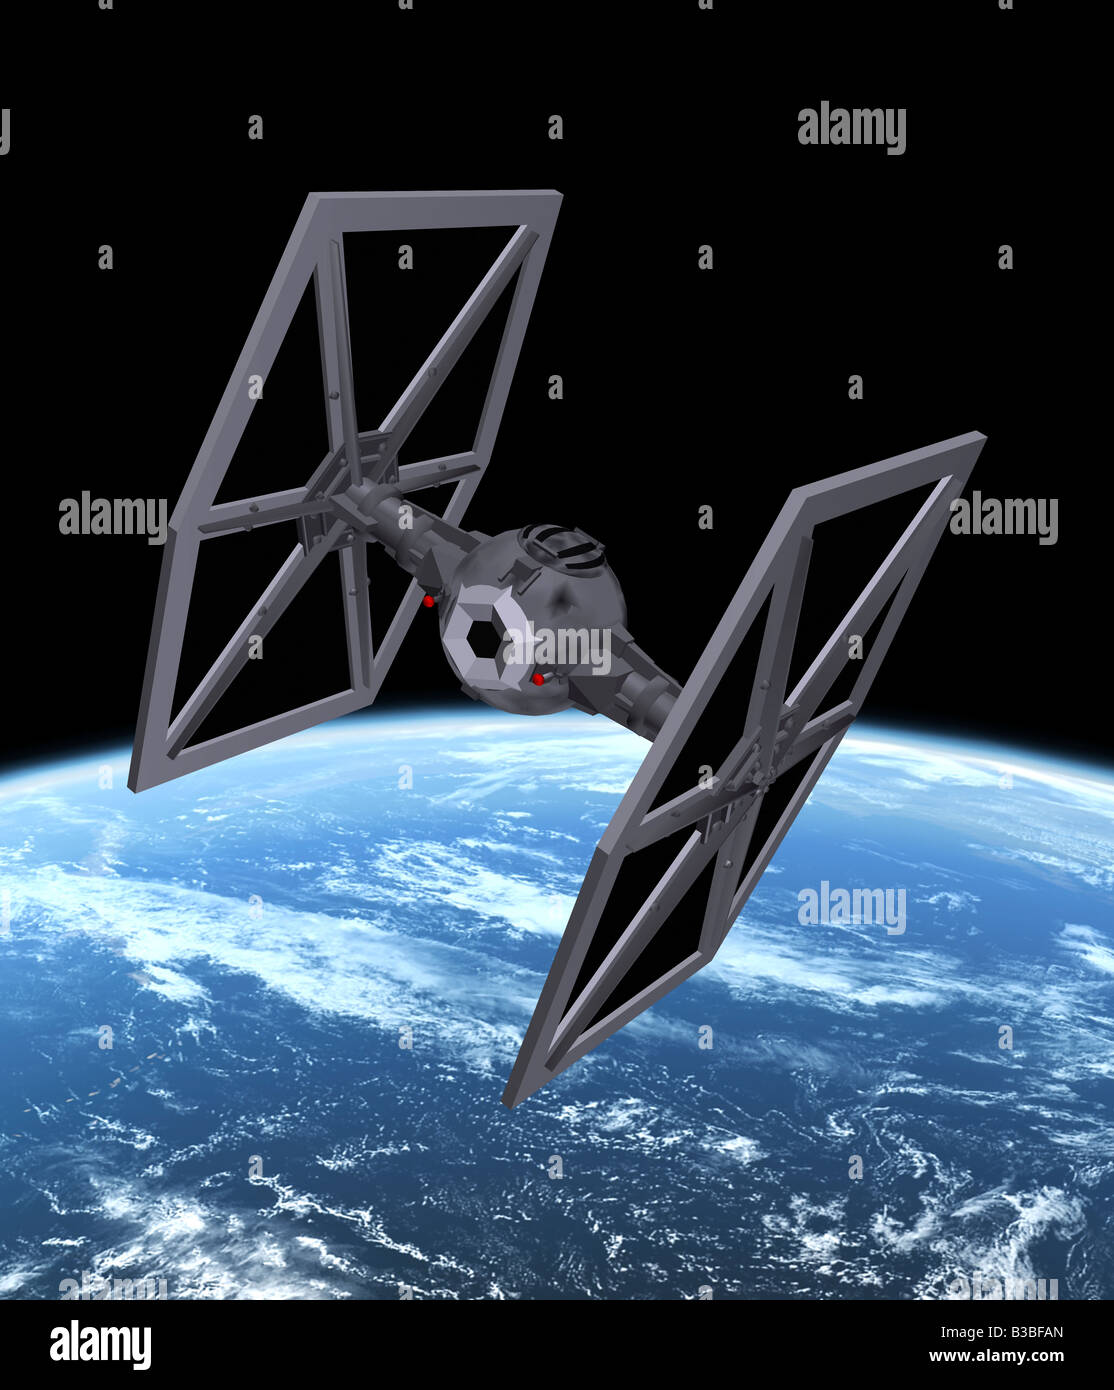 computer enhanced fictional spacecraft TIE fighter in outer space Stock Photo